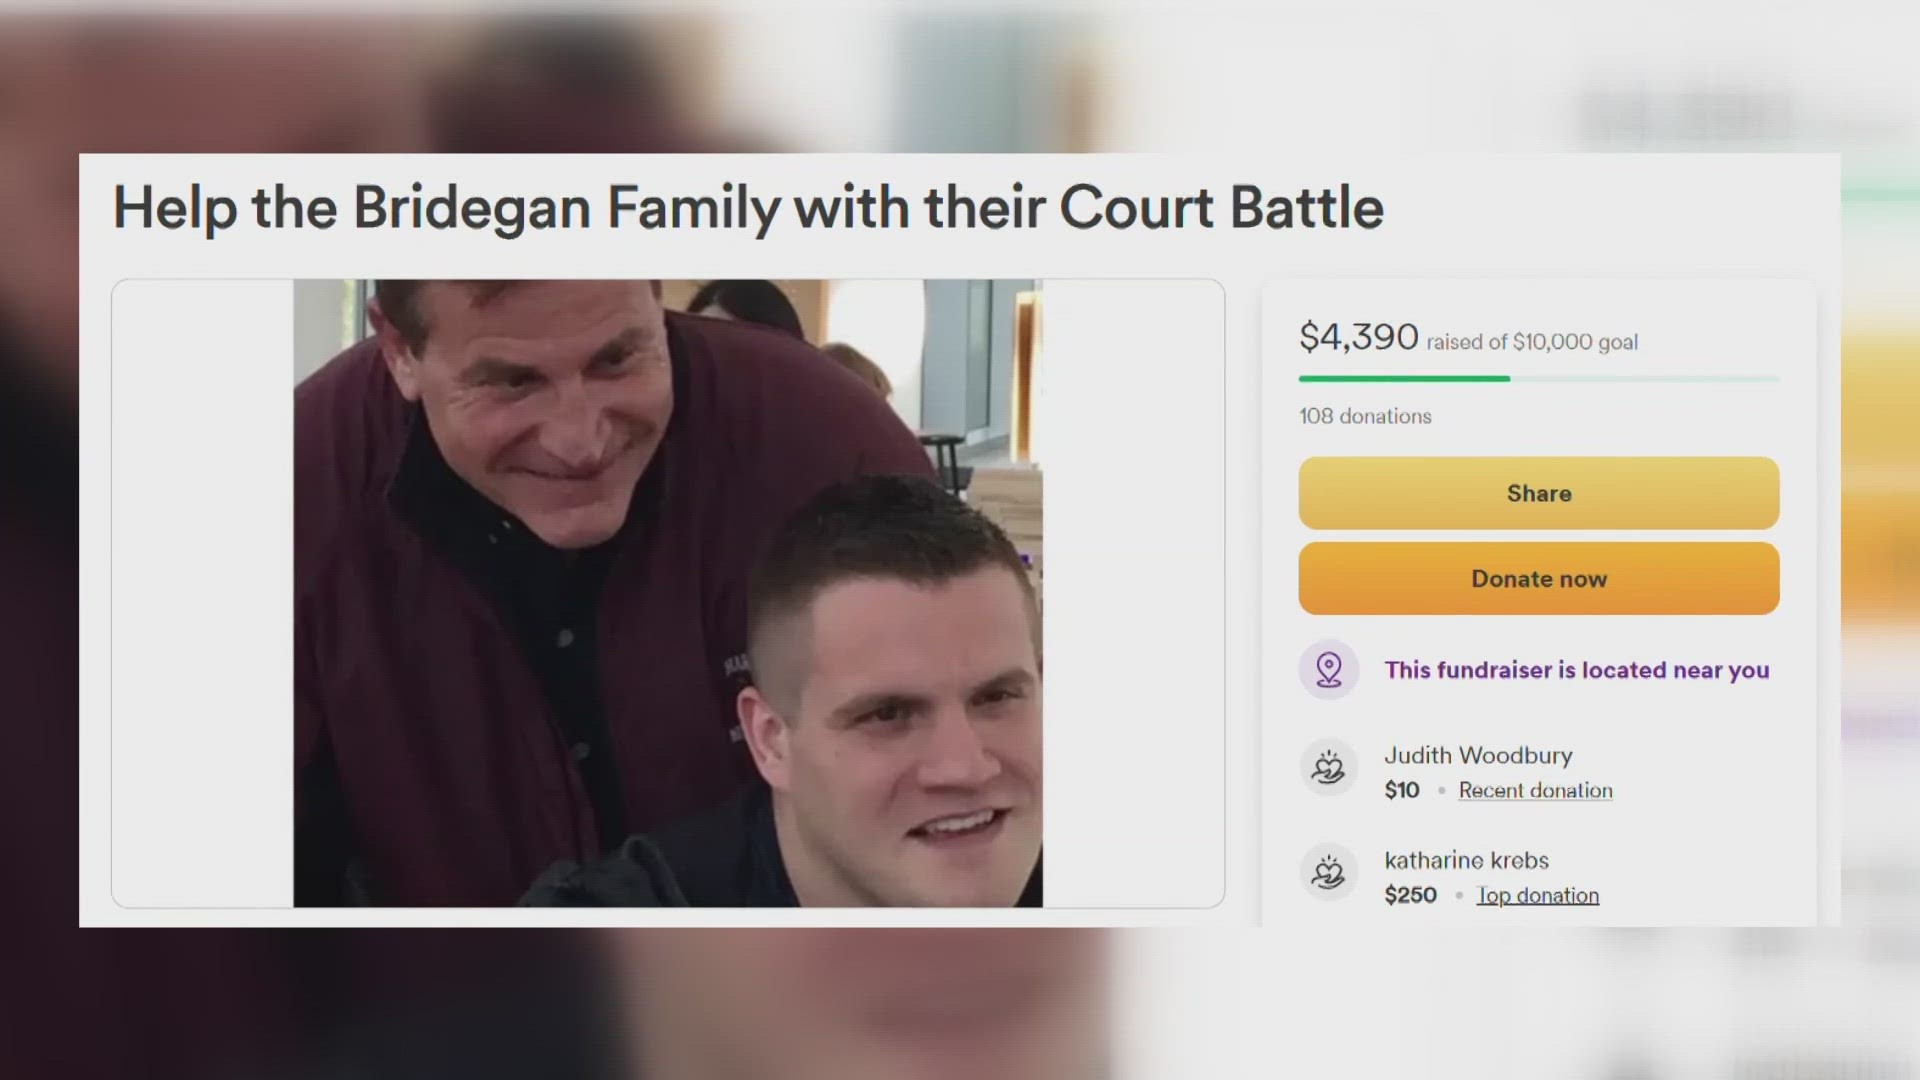 While Bridegan's ex-wife and accused killer has retained a high-profile attorney, his parents are asking for funds as they sue her for visitation rights.